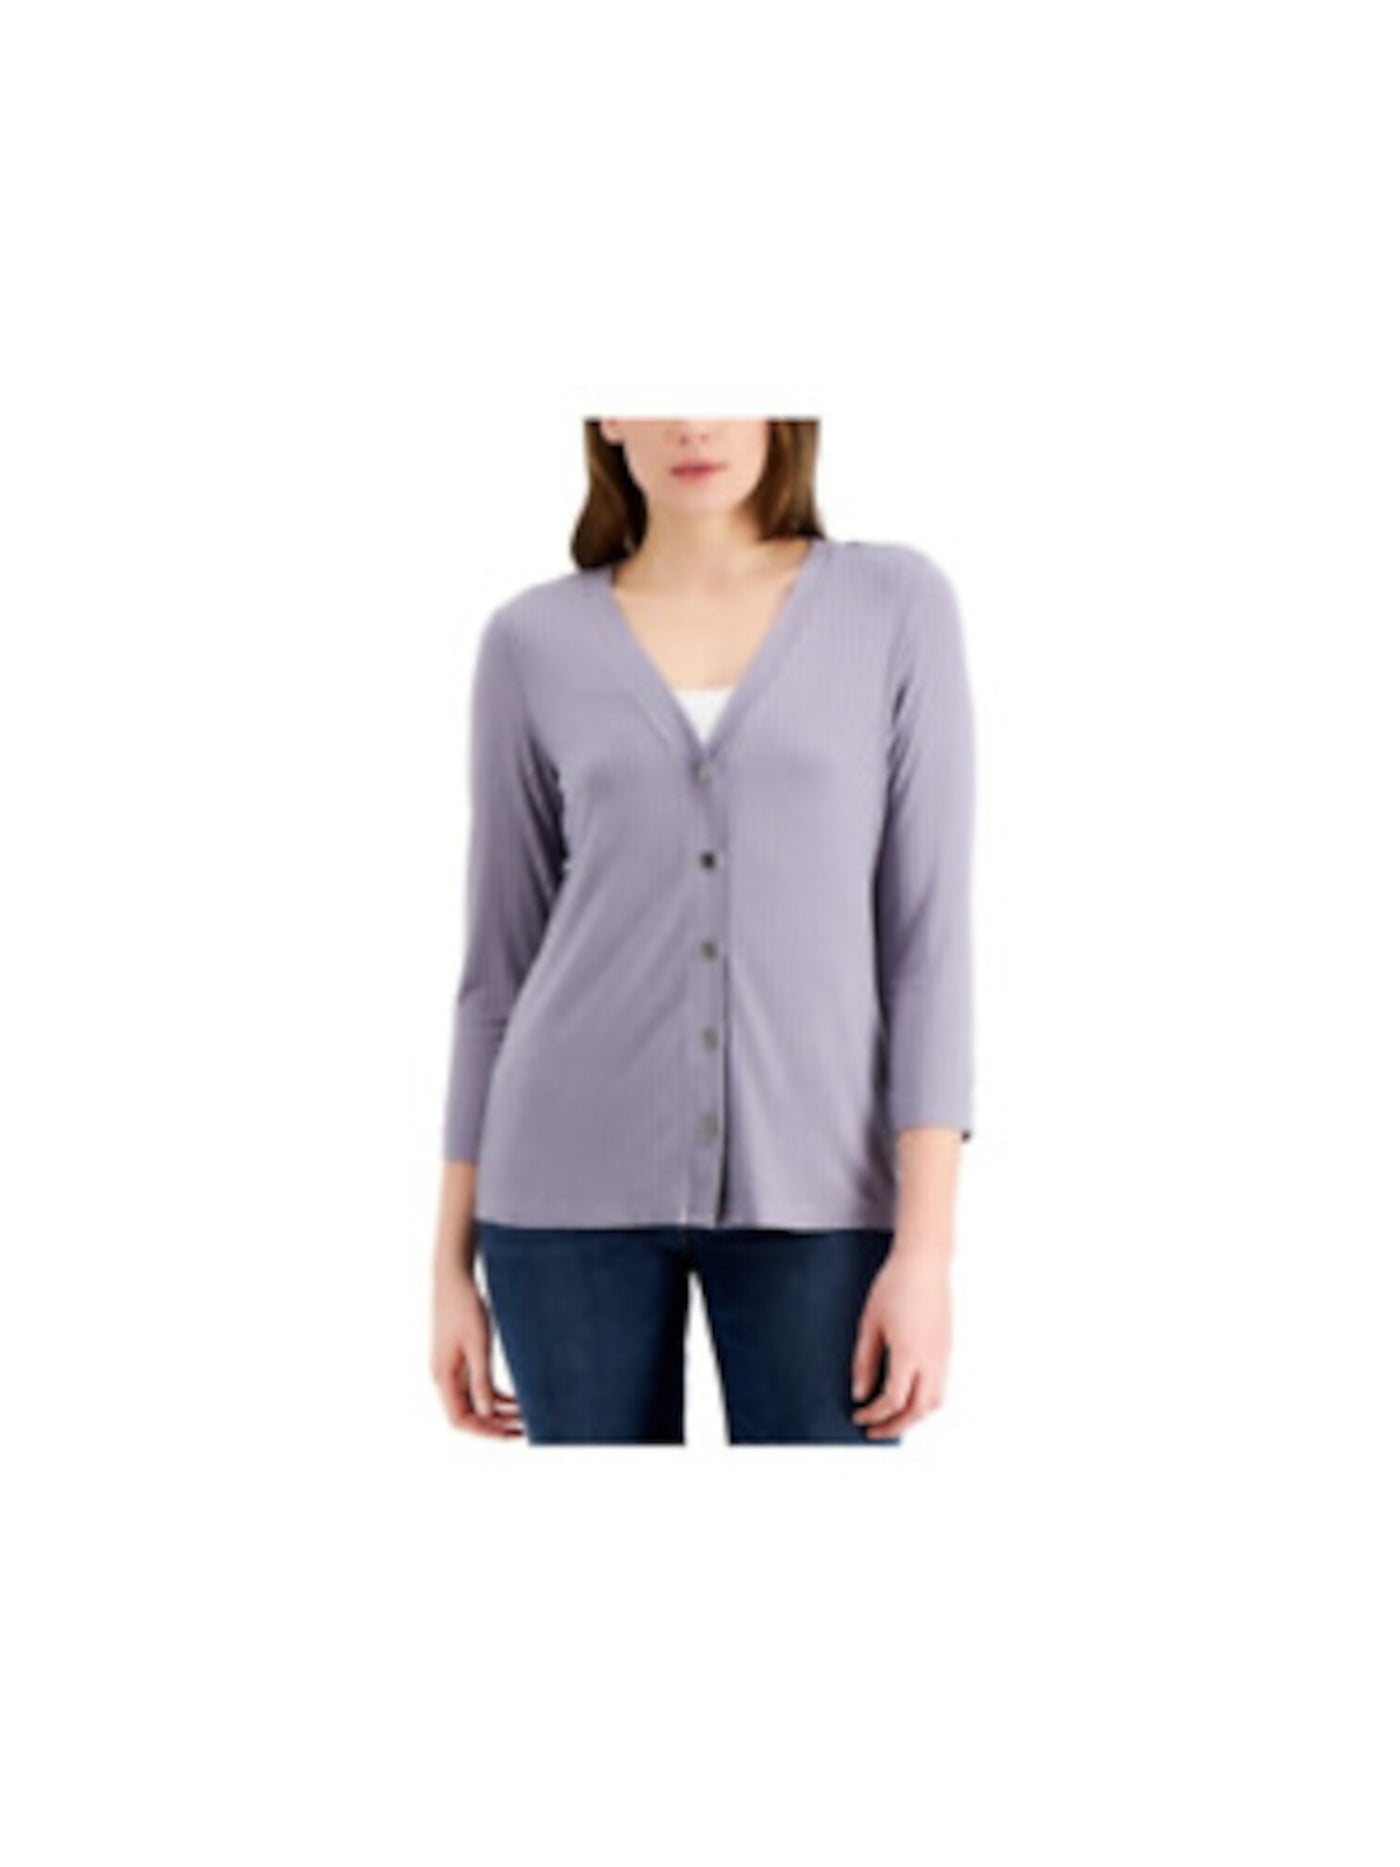 FEVER Womens Gray Long Sleeve V Neck Wear To Work Button Up Top XL